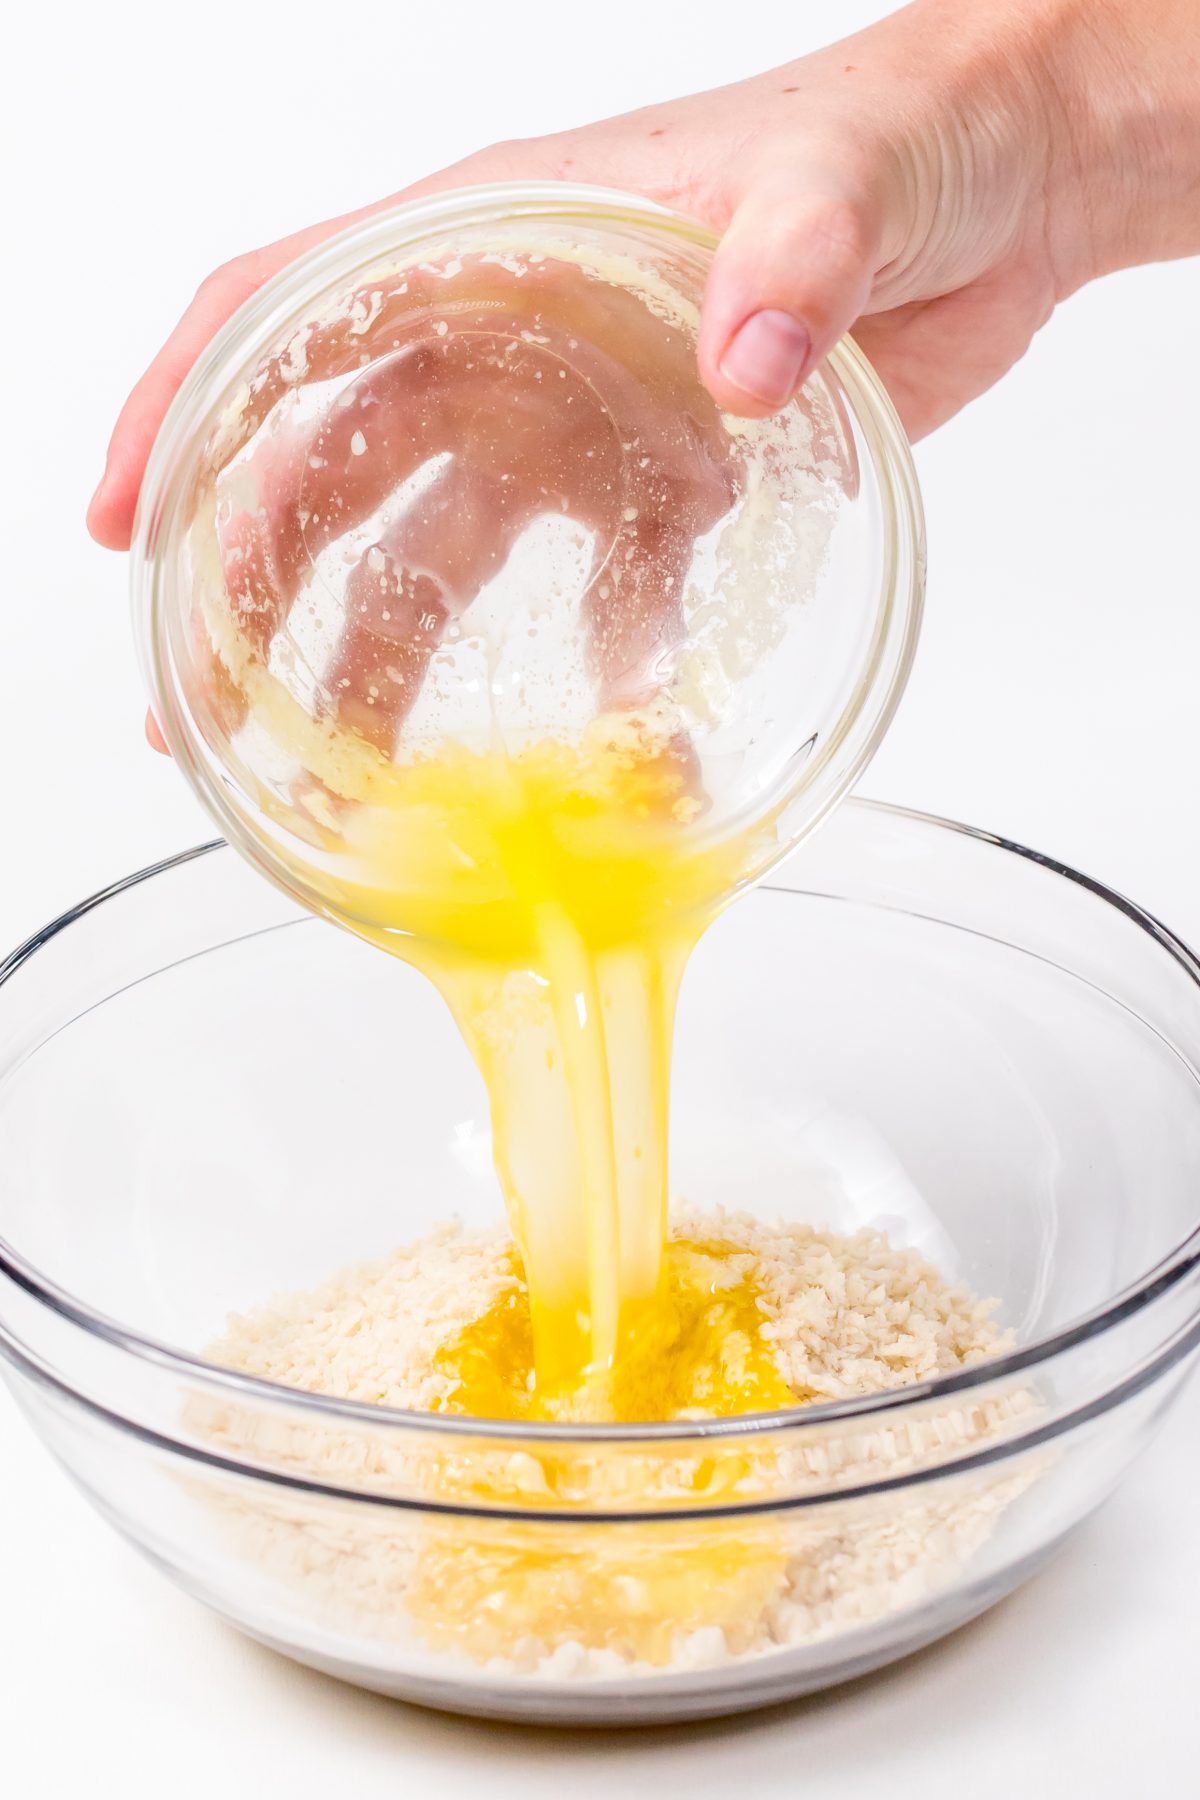 Pour melted butter over bread crumbs